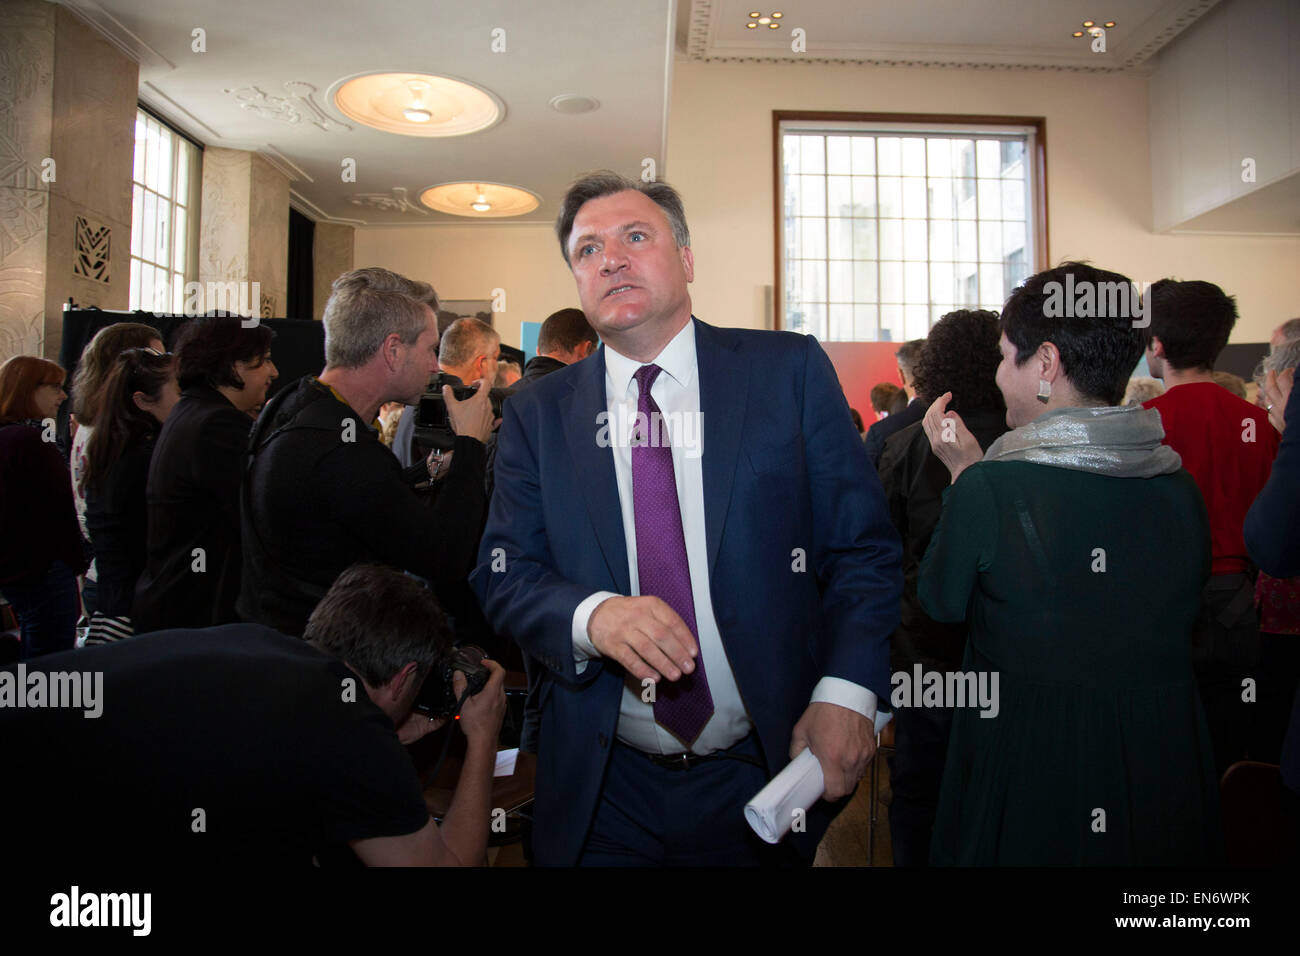 London, UK. Wednesday 29th April 2015. Labour Party Shadow Chancellor Ed Balls leaving a General Election 2015 campaign event on the Tory threat to family finances, entitled: The Tories’ Secret Plan. Held at the Royal Institute of British Architects. Credit:  Michael Kemp/Alamy Live News Stock Photo